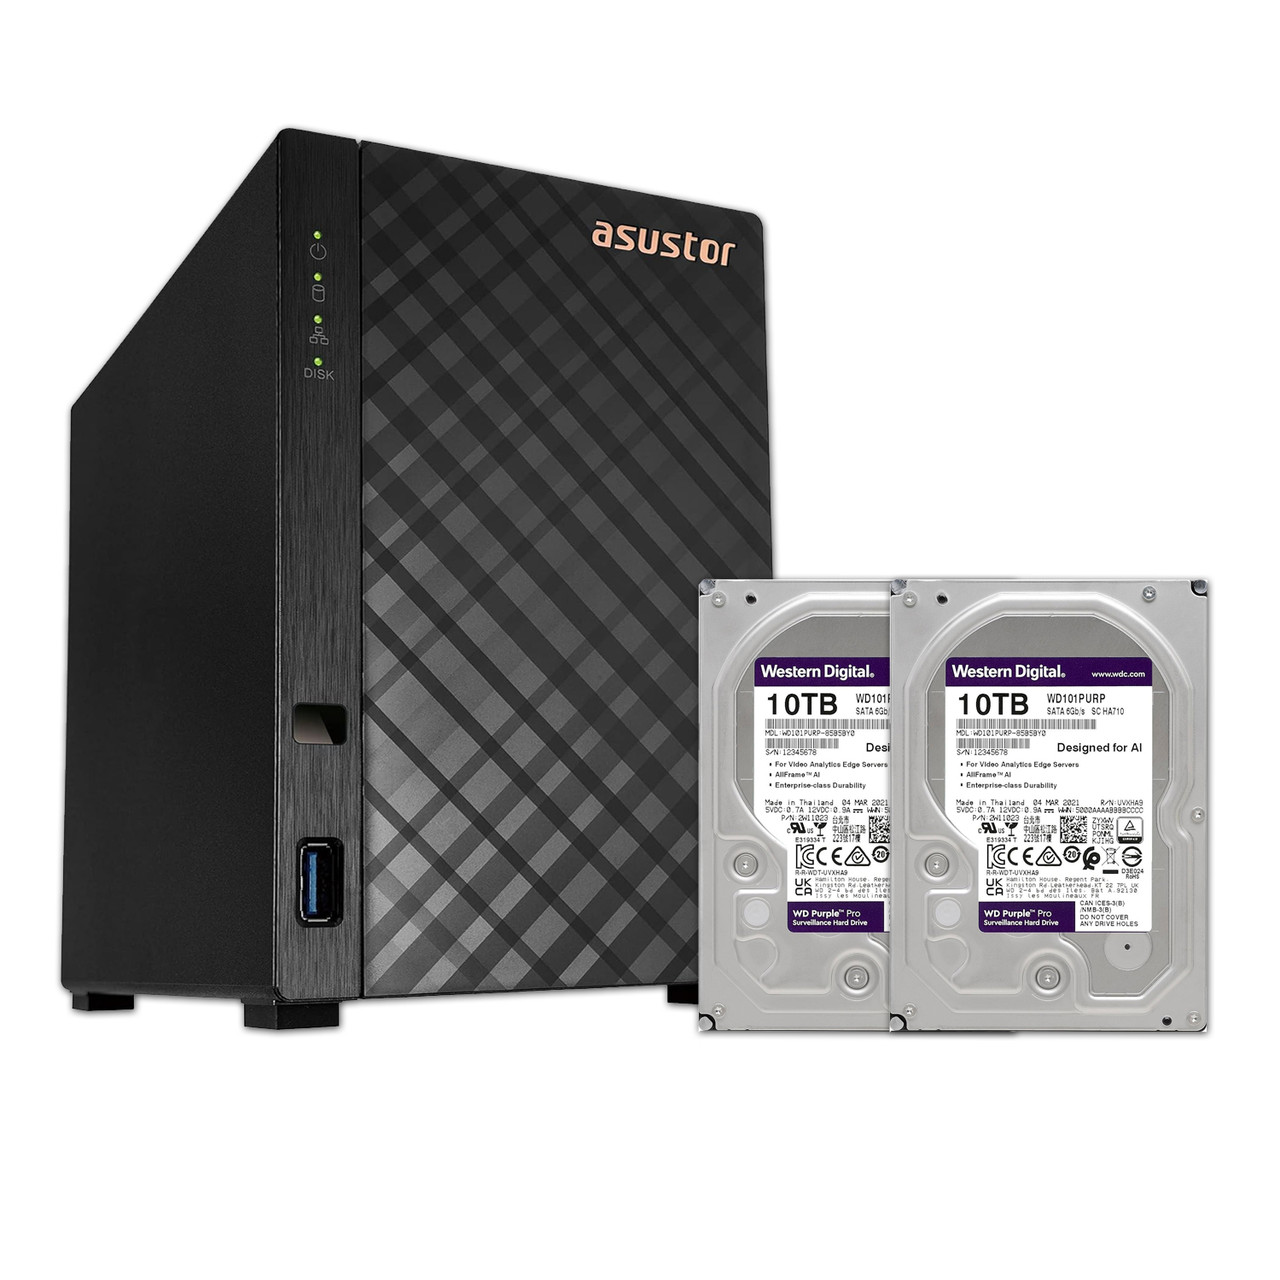 Asustor AS1102T DRIVESTOR 2, Personal 2-Bays NAS, Quad-Core CPU, 2.5GbE Port, 1GB DDR4, Network Attached Storage w/ Dual WD Purple Pro Smart Video Hard Drive 10TB